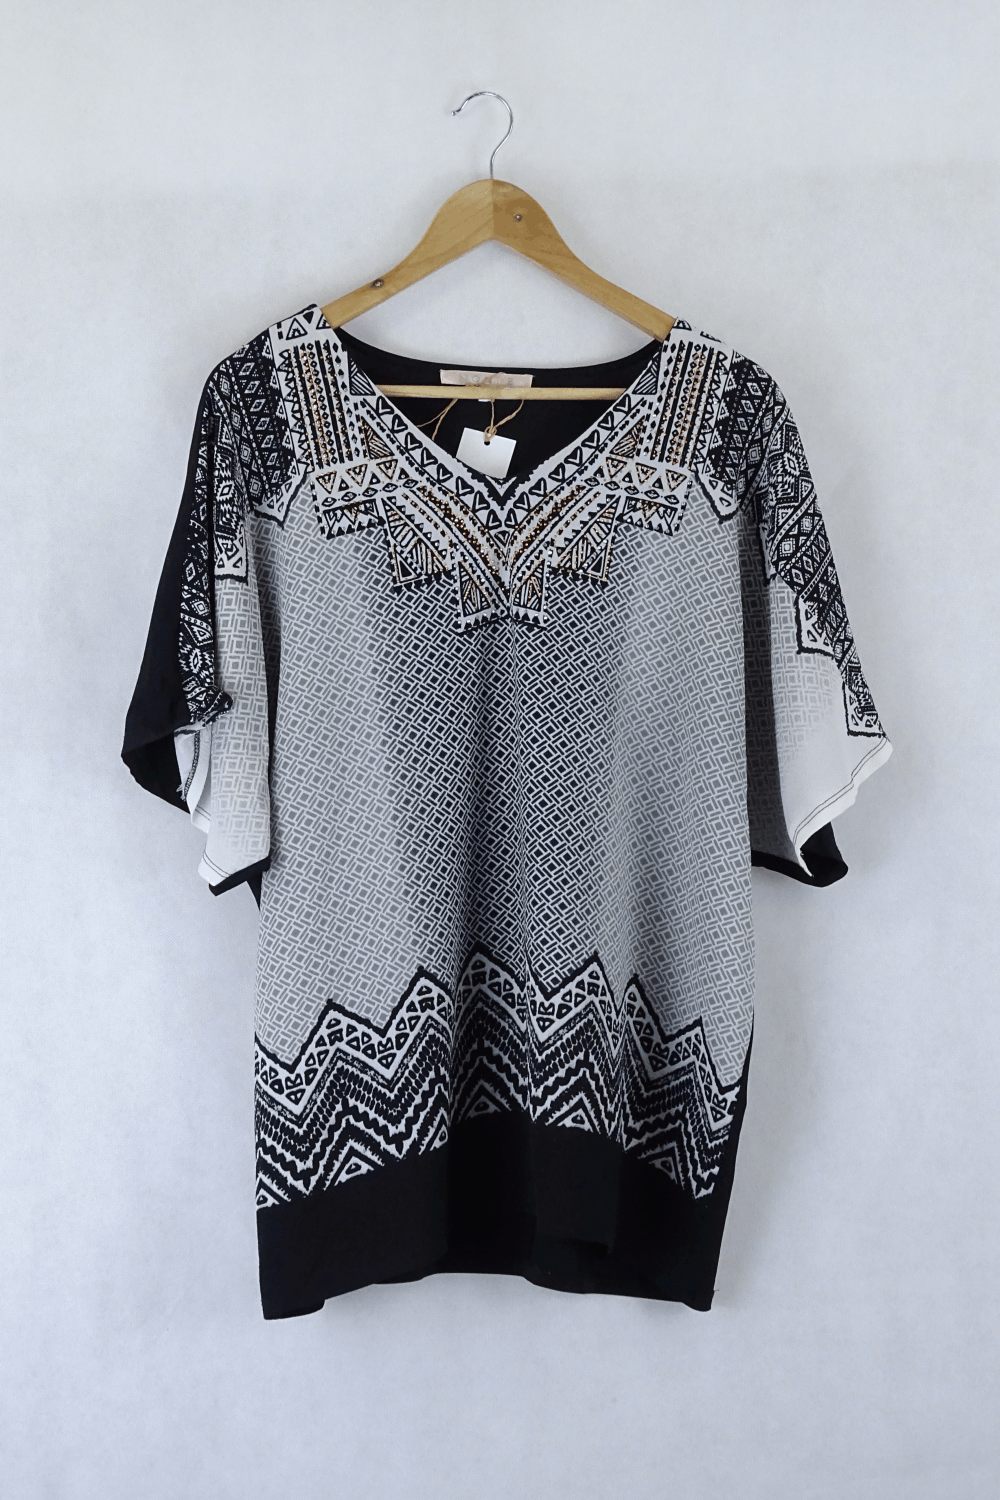 Noni B Black And White Printed Blouse With Embellishment 14